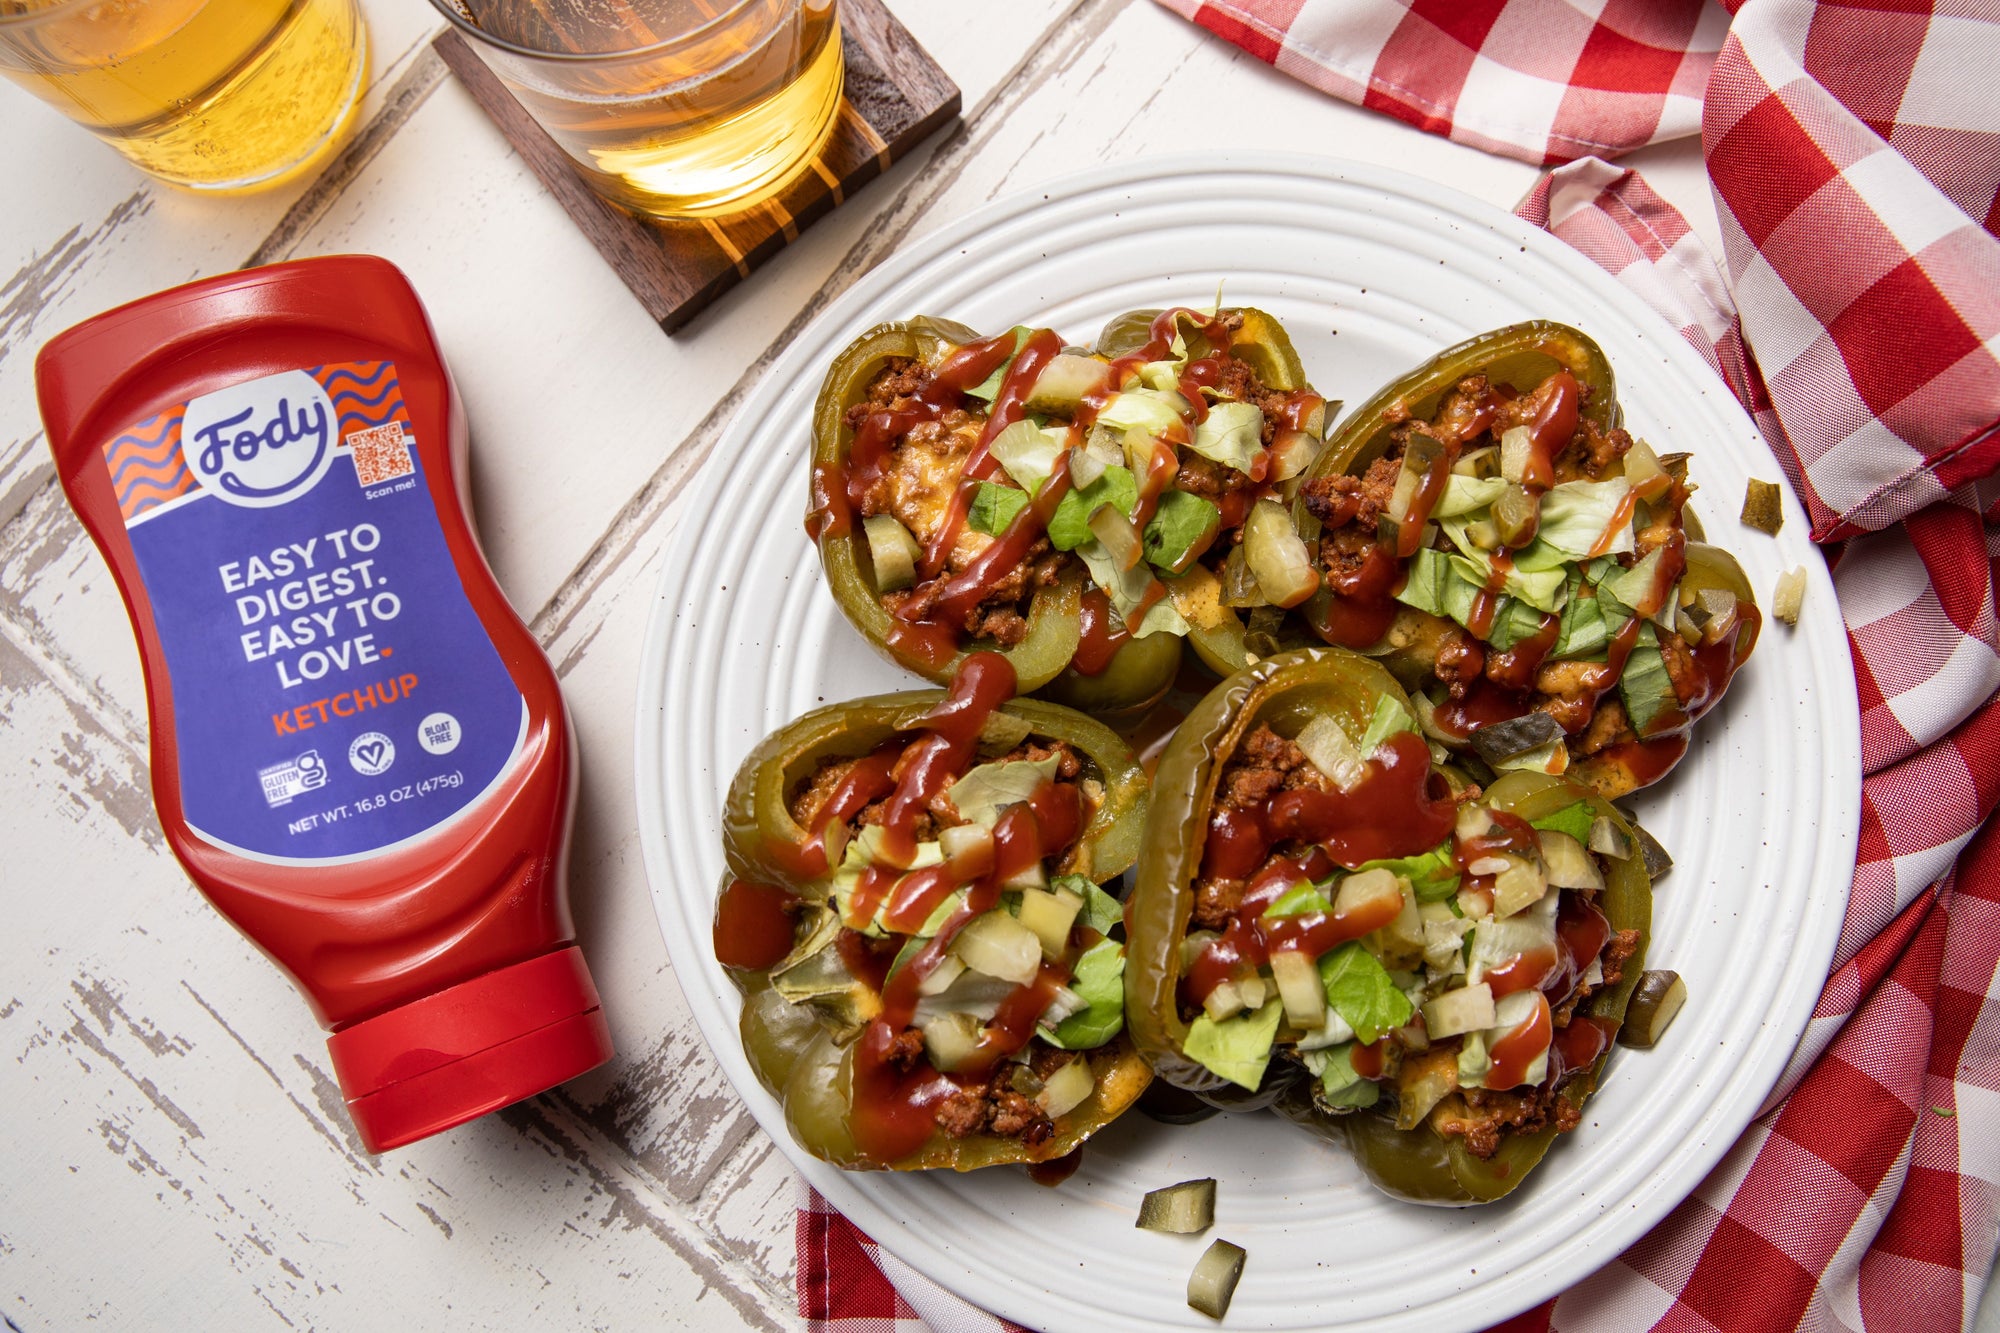 Two of Fody’s Cheese Stuffed Peppers on a plate beside a bottle of Fody’s Ketchup.